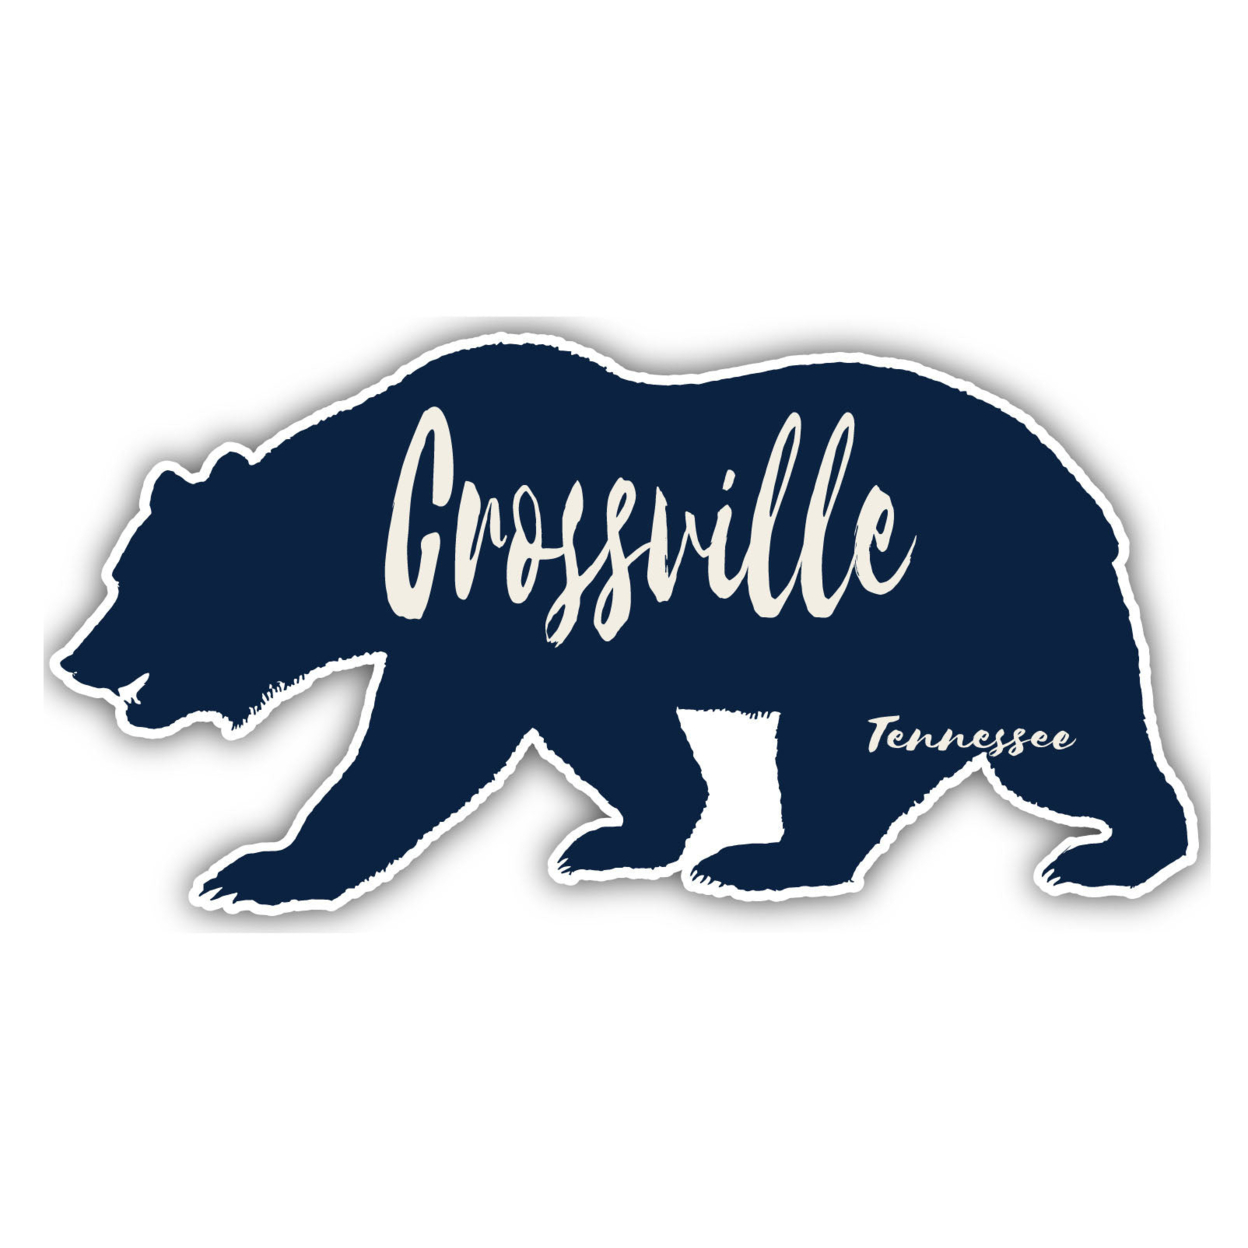 Crossville Tennessee Souvenir Decorative Stickers (Choose Theme And Size) - Single Unit, 12-Inch, Tent